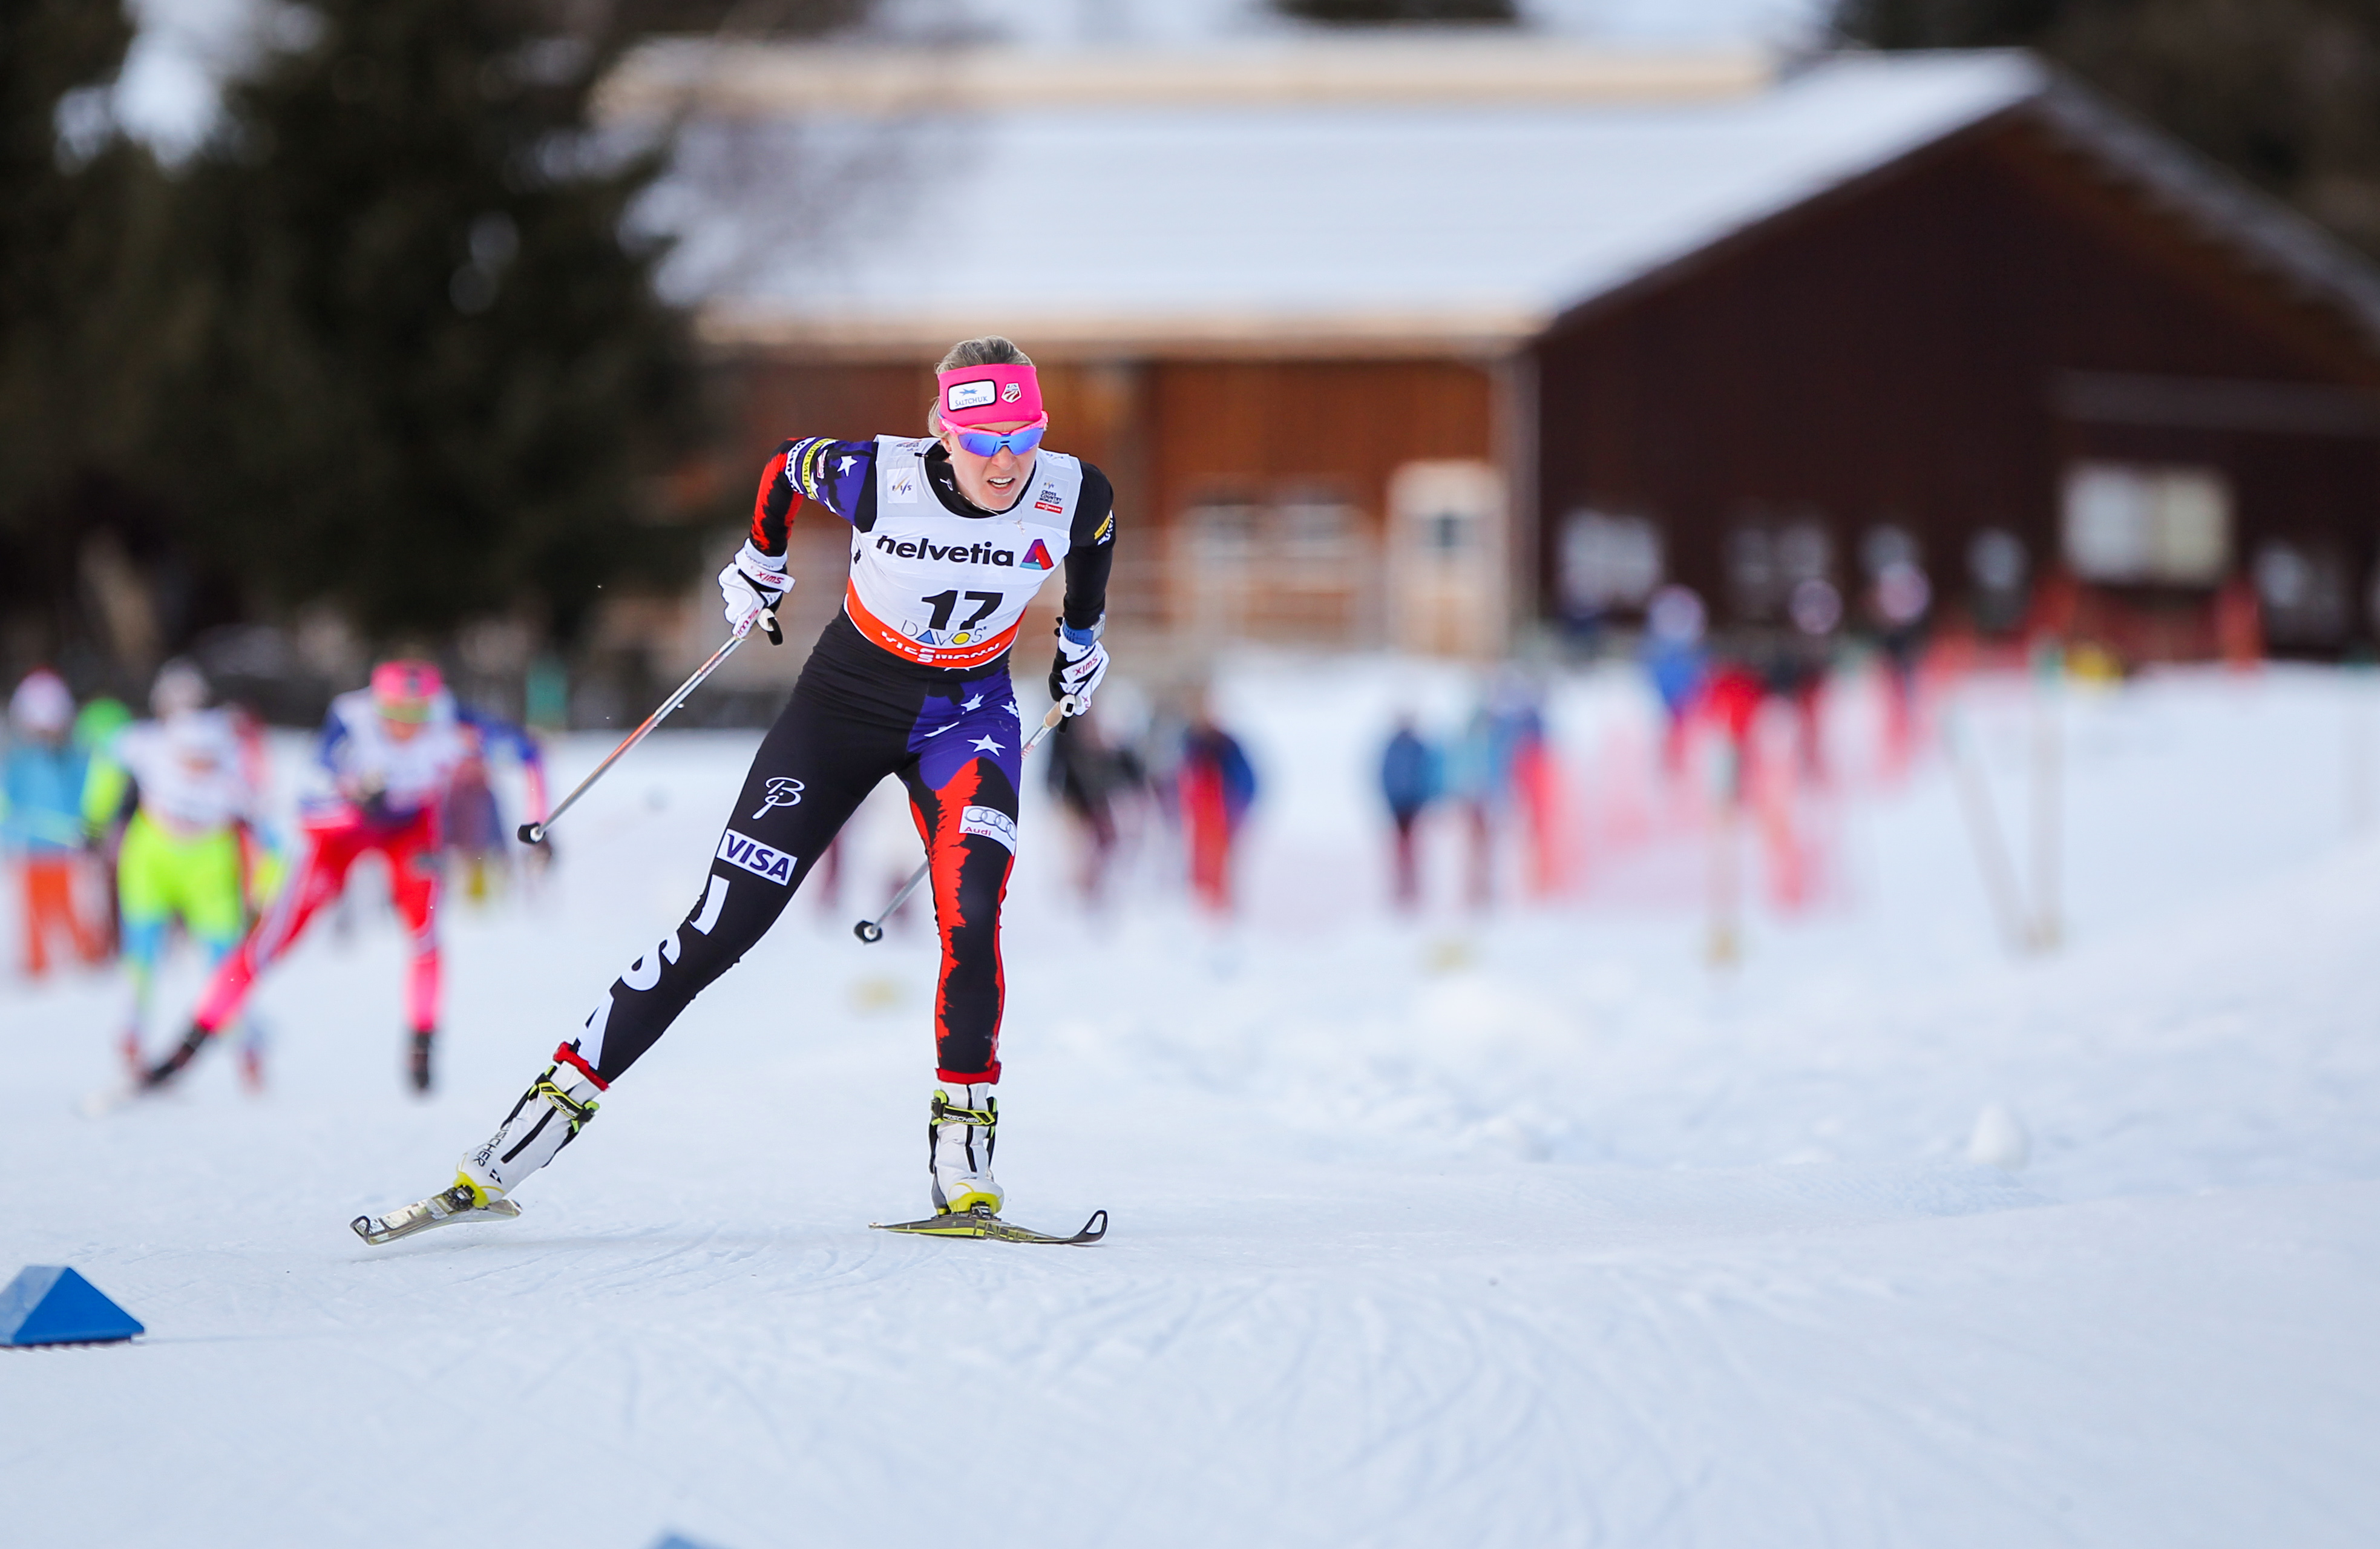 USST's Sadie Bjornsen racing to 29th in the Davos World Cup 10 freestyle, Dec. 20, 2014. (Photo: Fischer/Nordic Emphasis) 